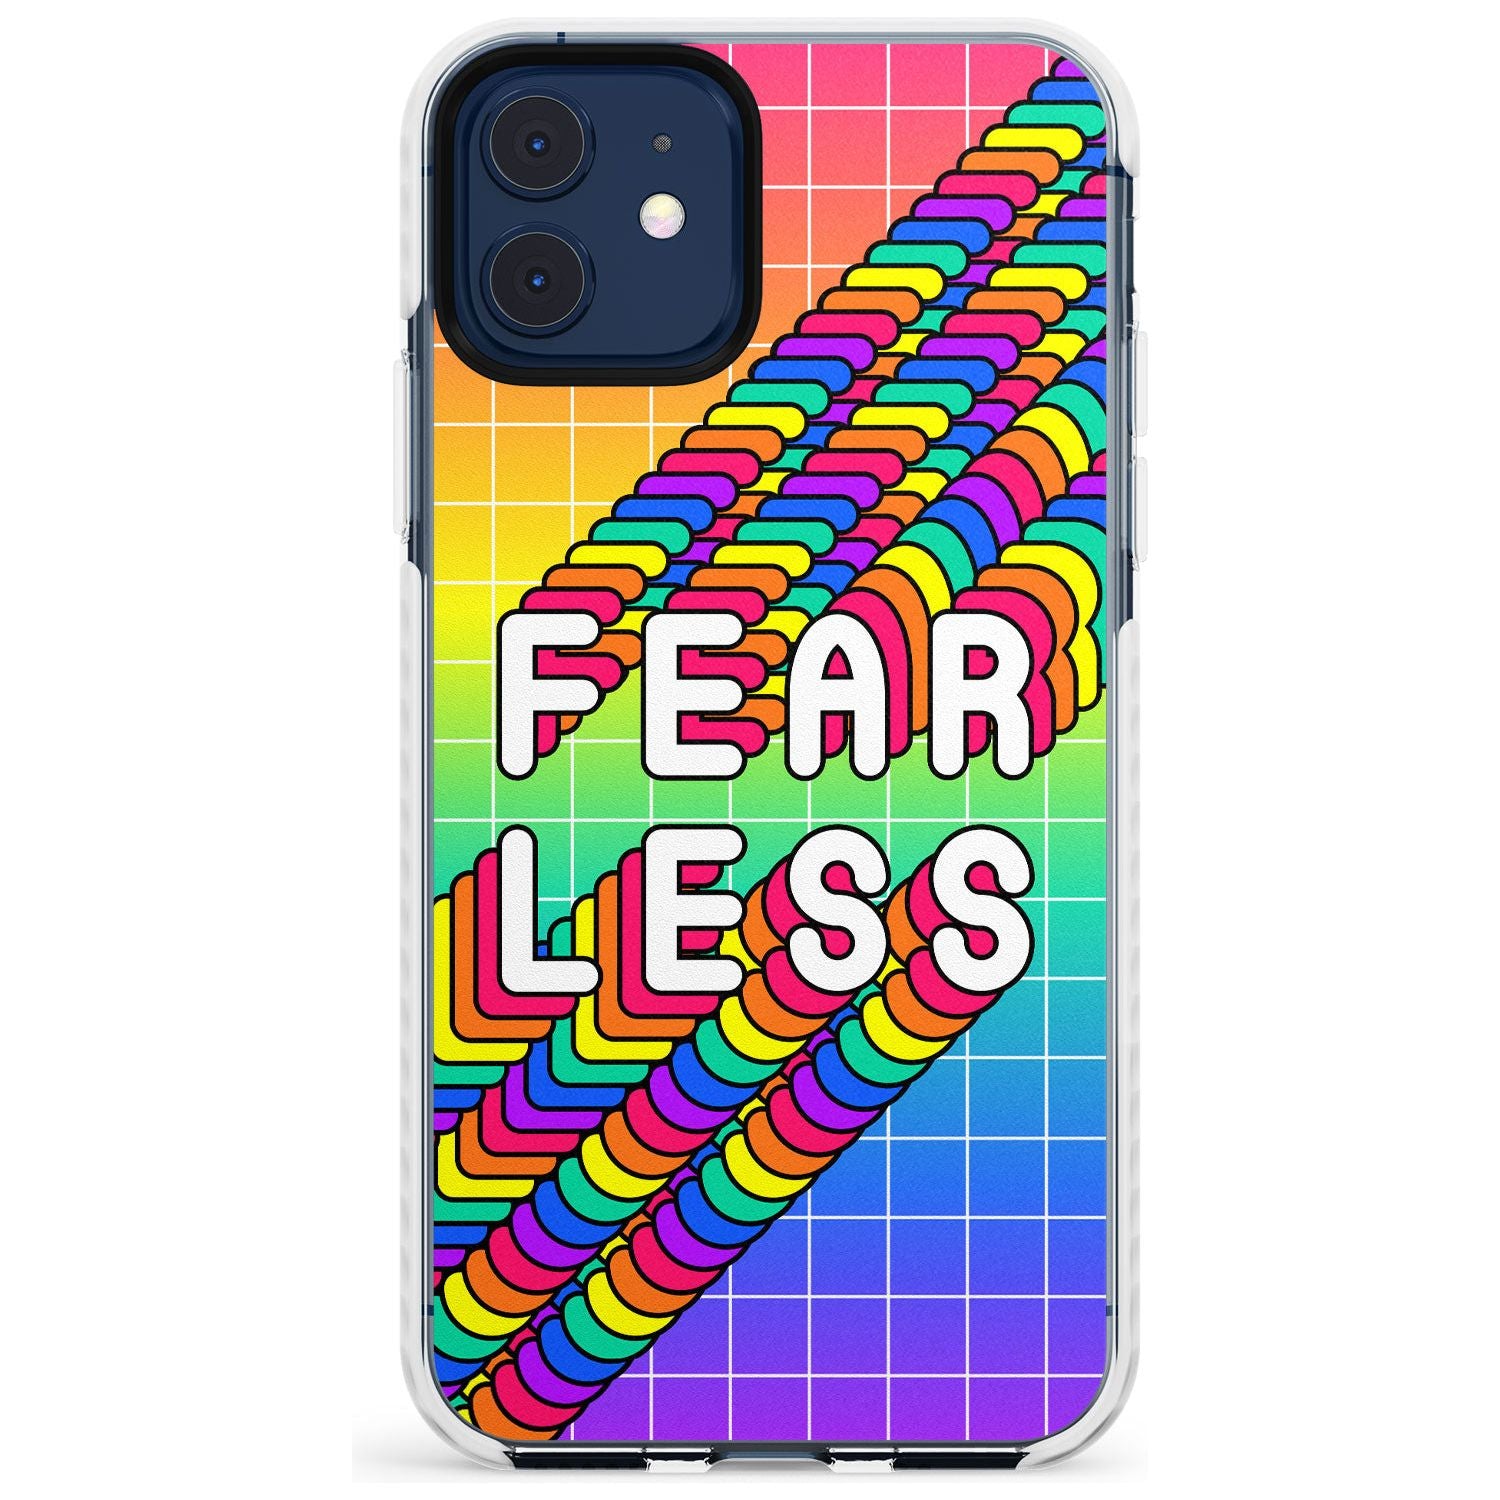 Fearless Impact Phone Case for iPhone 11